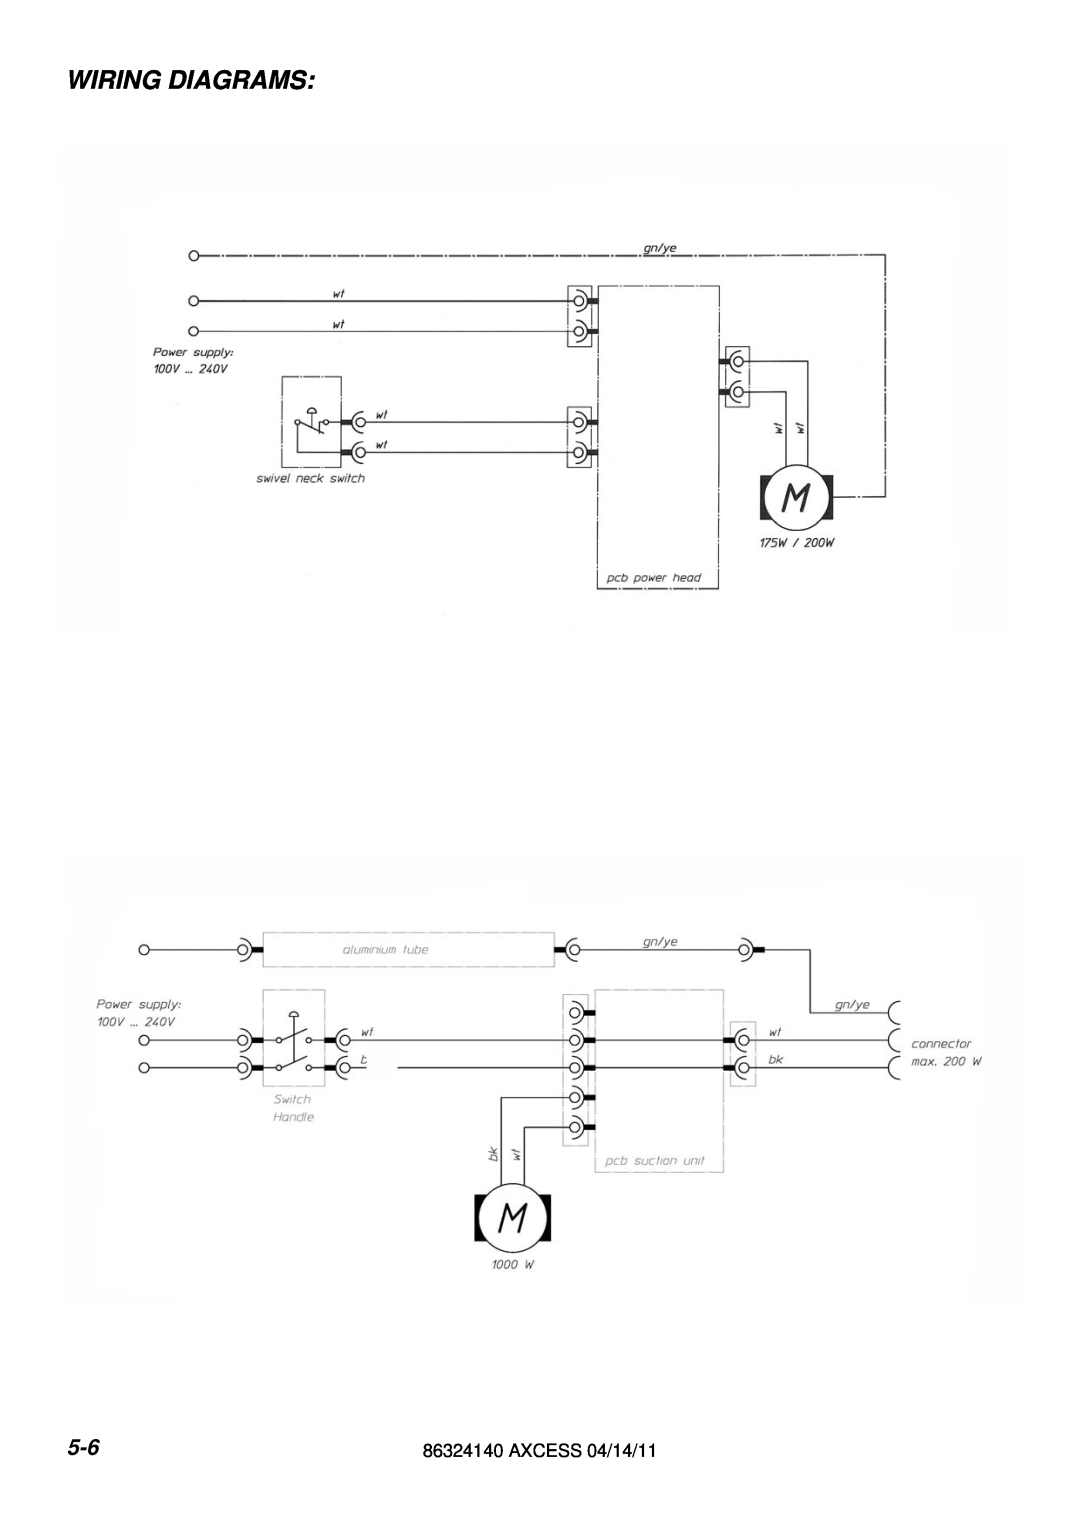 Windsor 1.012-061.0, 1.012-062.0 operating instructions Wiring Diagrams, AXCESS 04/14/11 